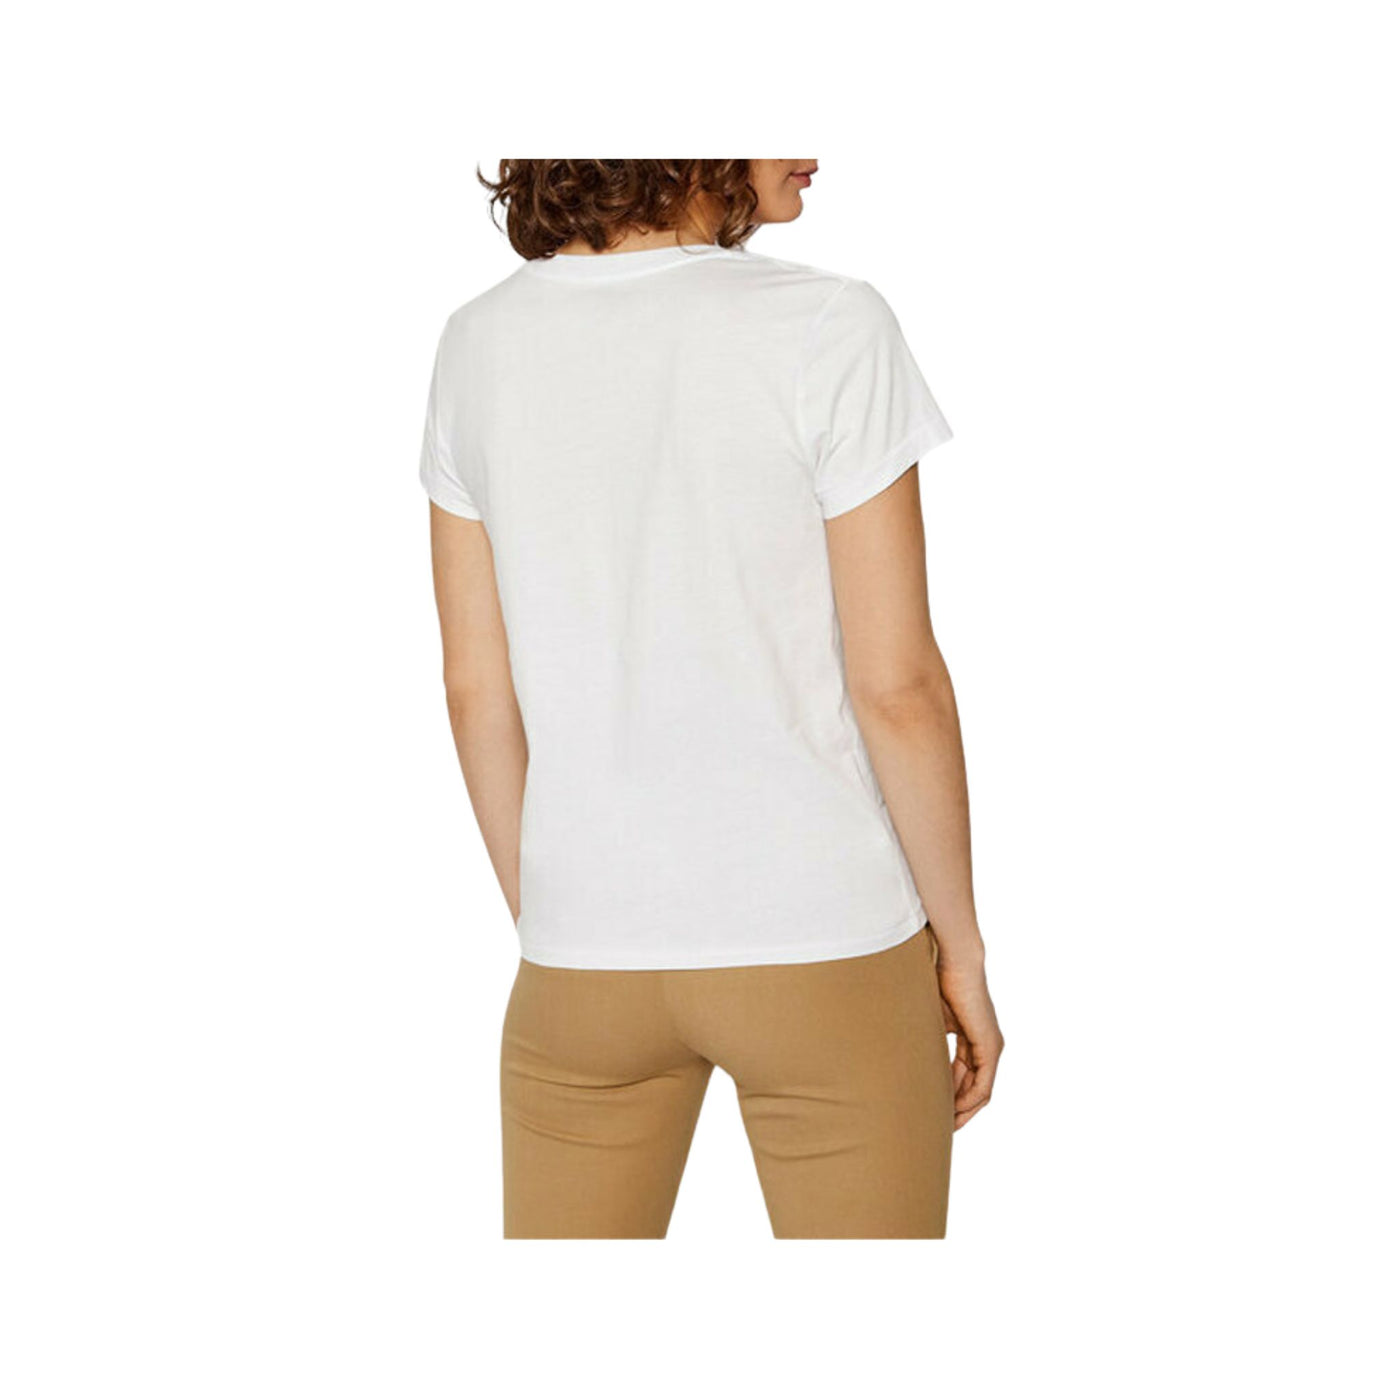 Solid color women's T-shirt in cotton